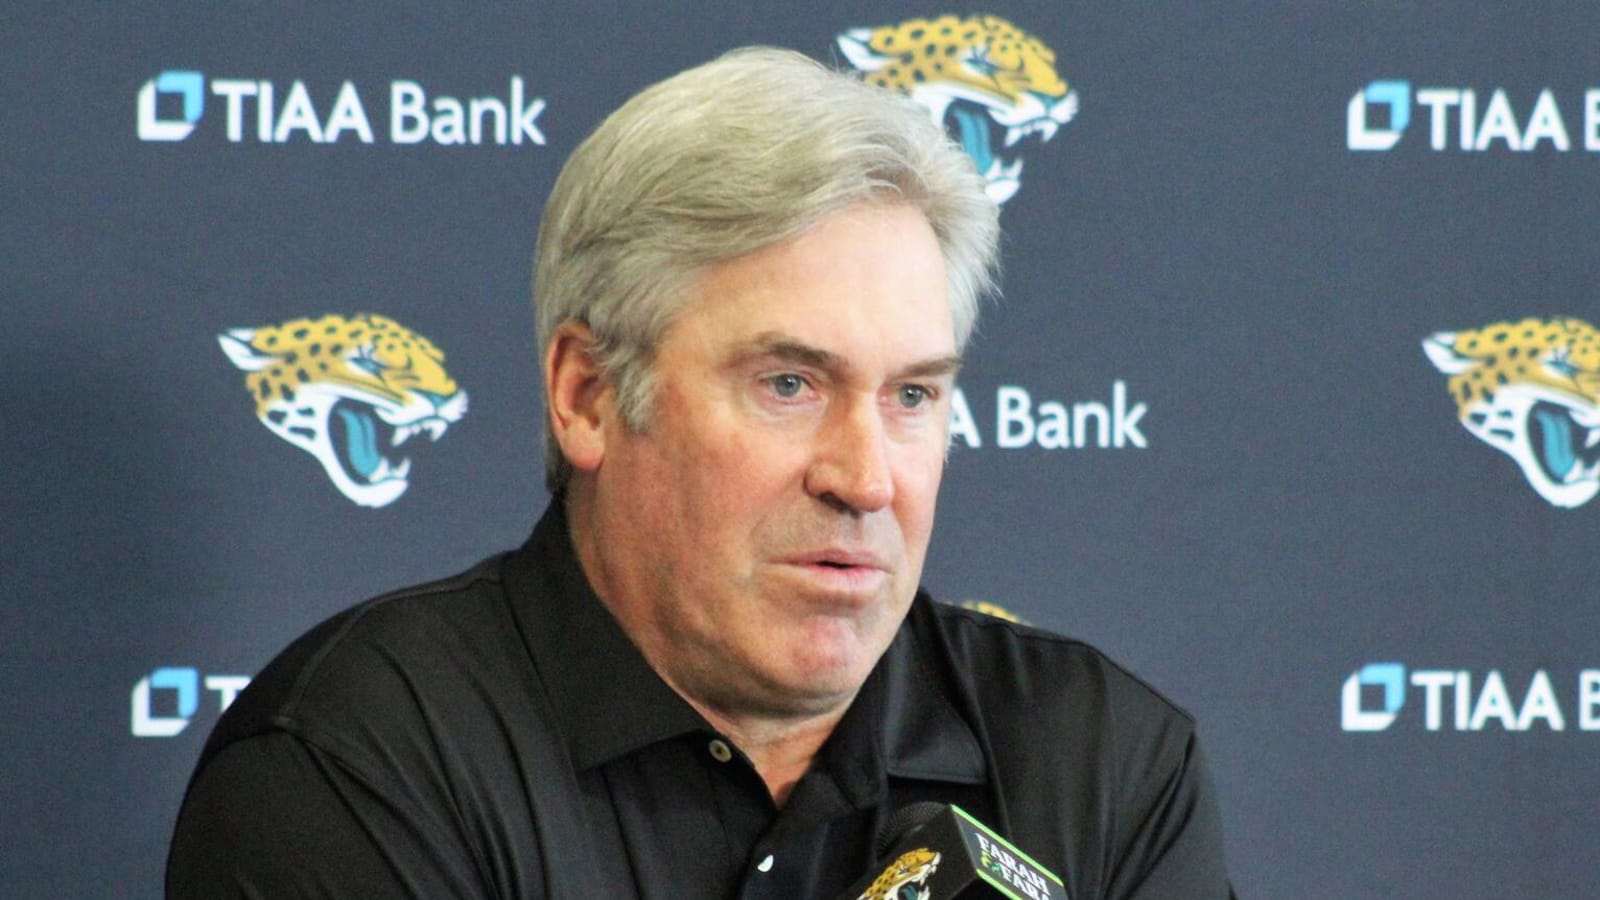 Jags remaining patient in pursuit of improving pass rush